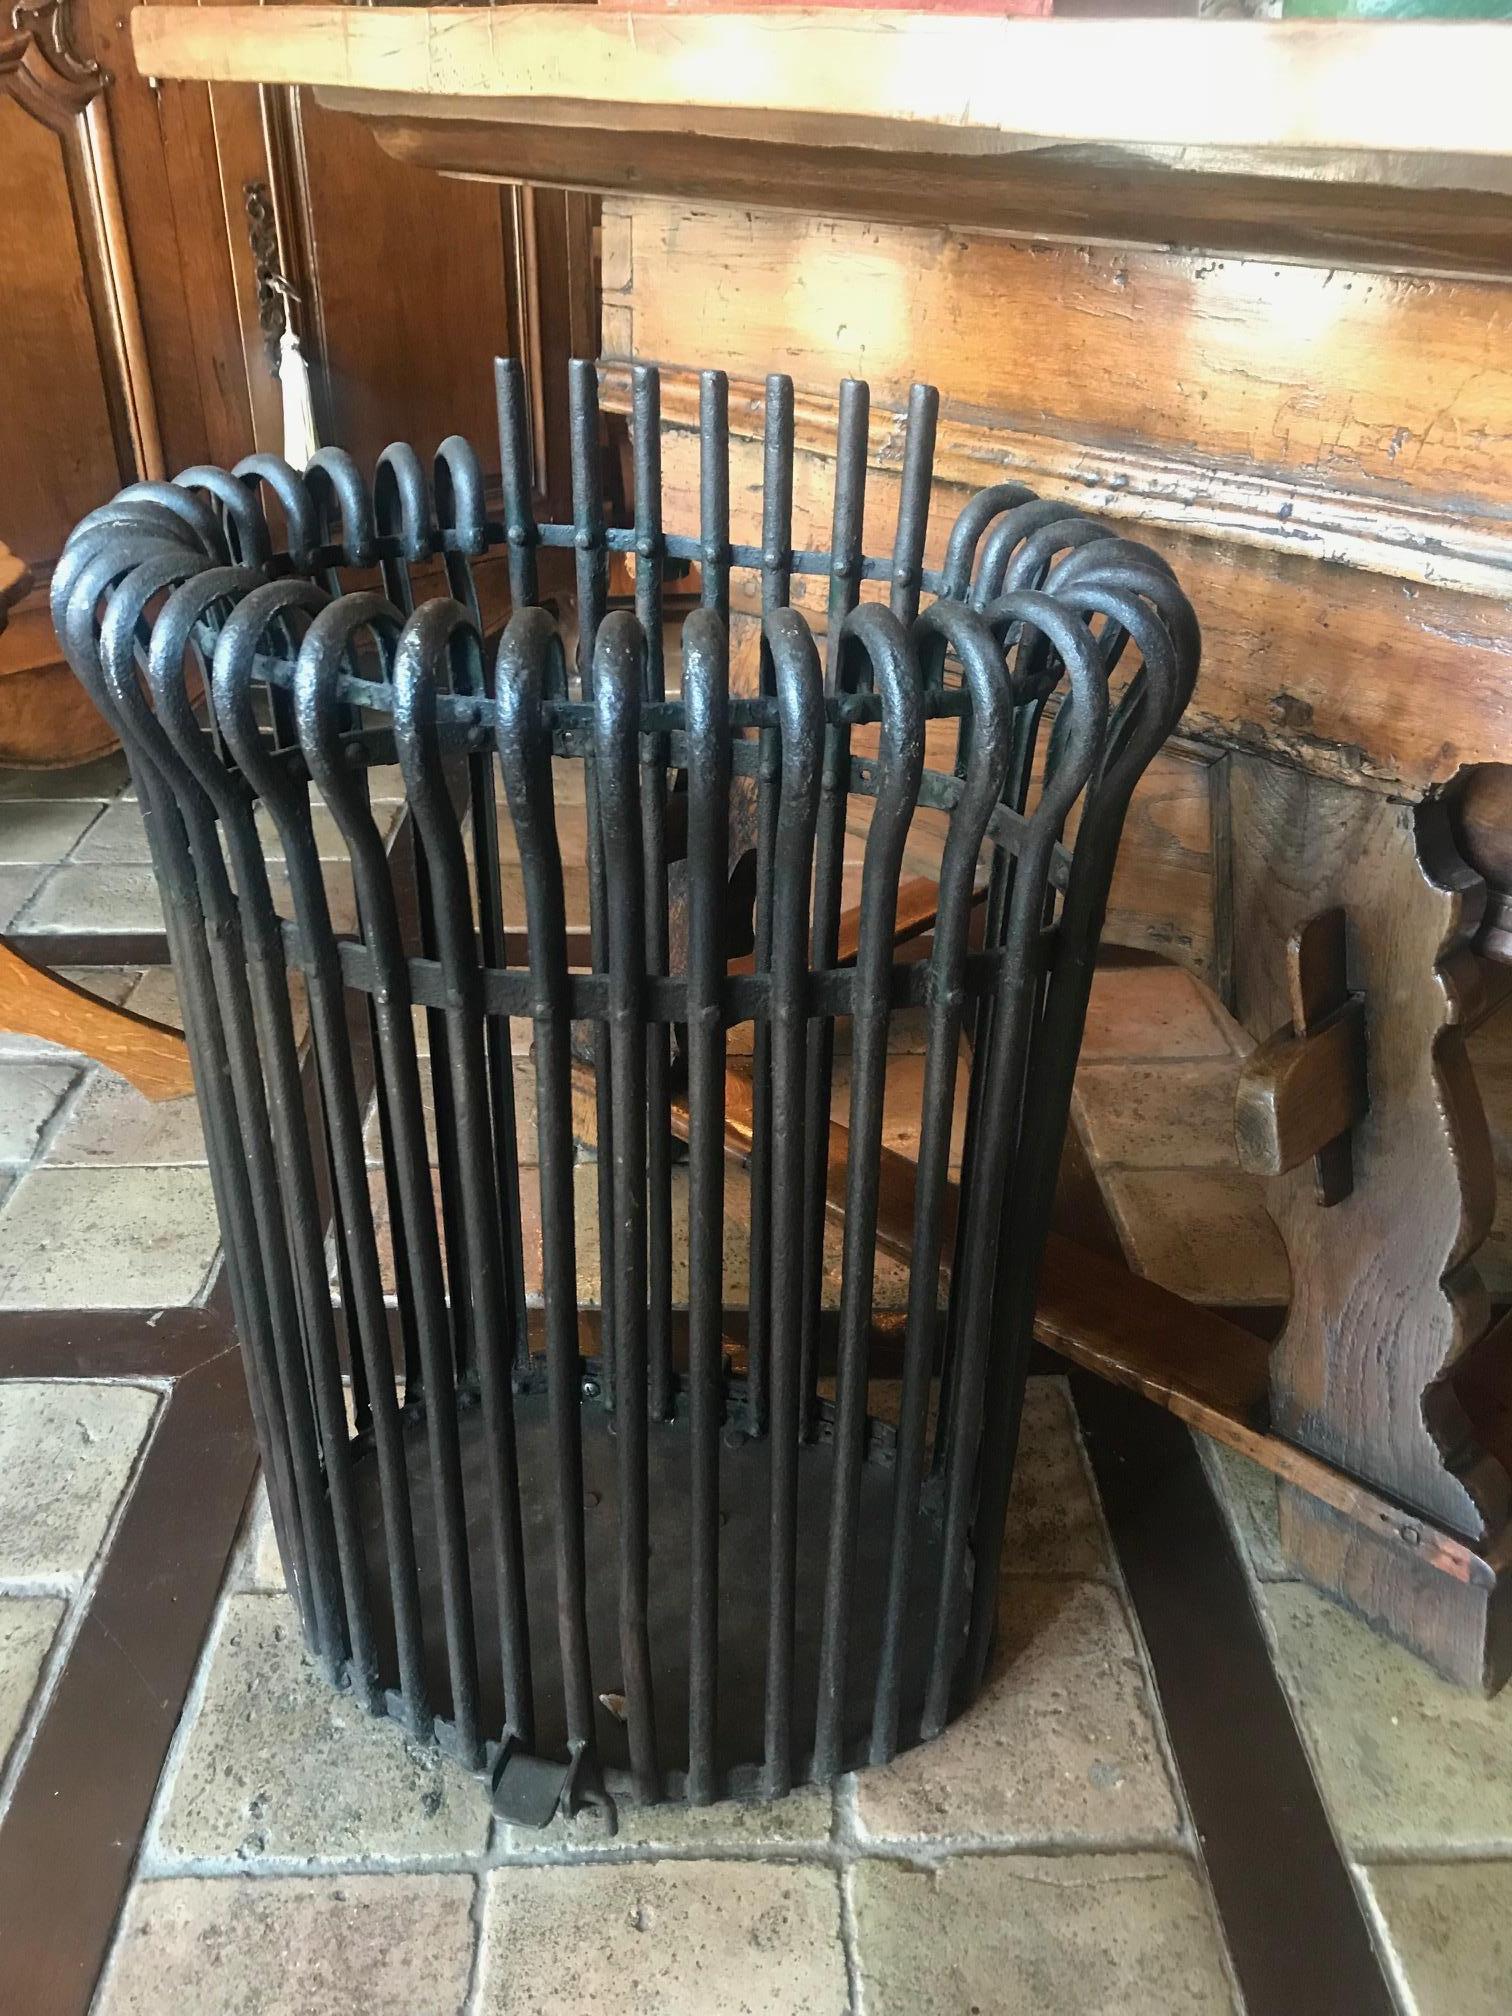 Late 19th century hand forged decorative metal elements as umbrella stand.
We have two of them available, they can be sold separately. could be used a log rack carrier holder 
These pieces were used originally for to transport the charcoal to heat